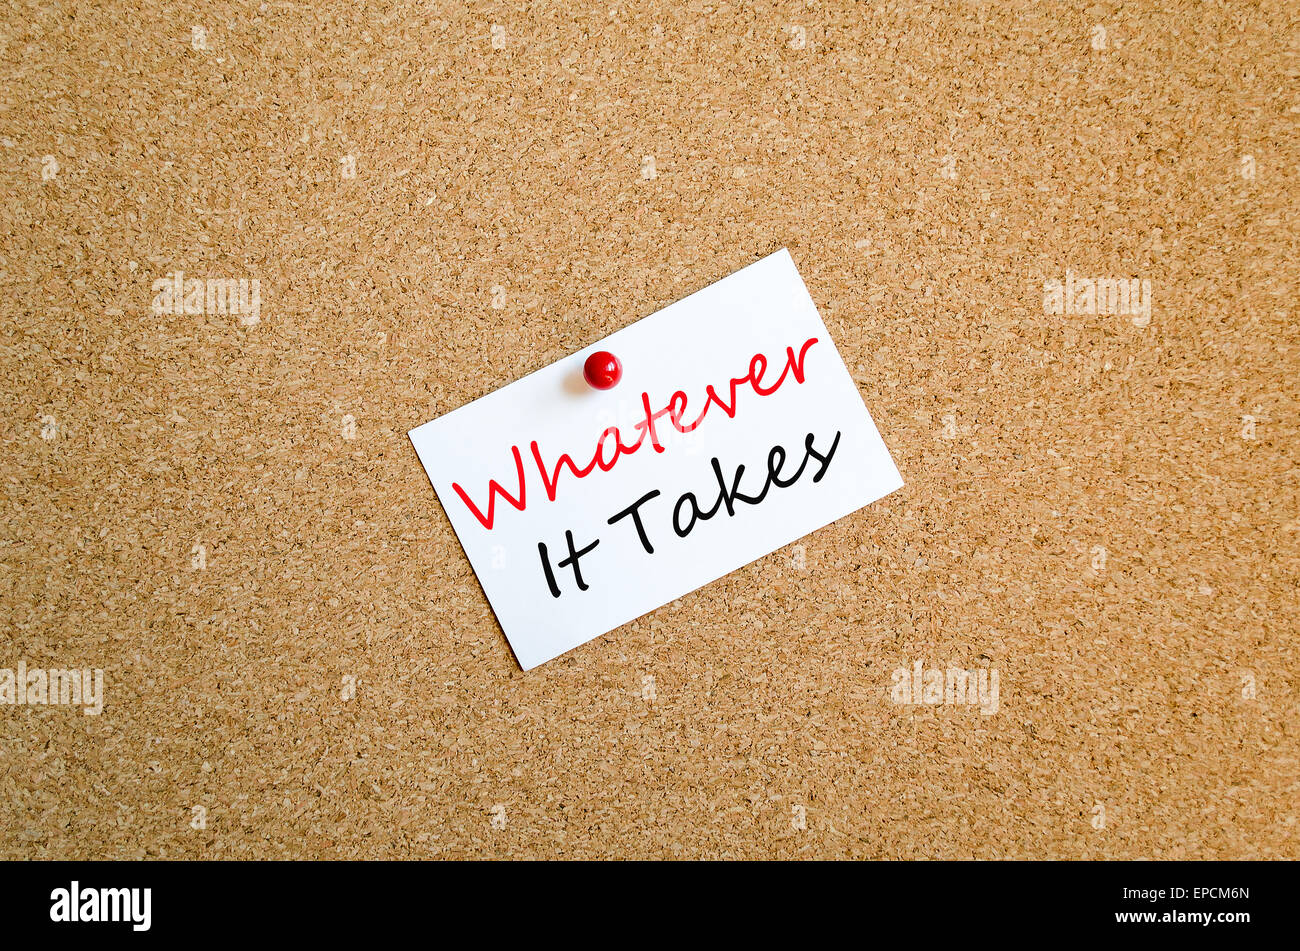 Sticky Note On Cork Board Background Whatever it takes concept Stock Photo